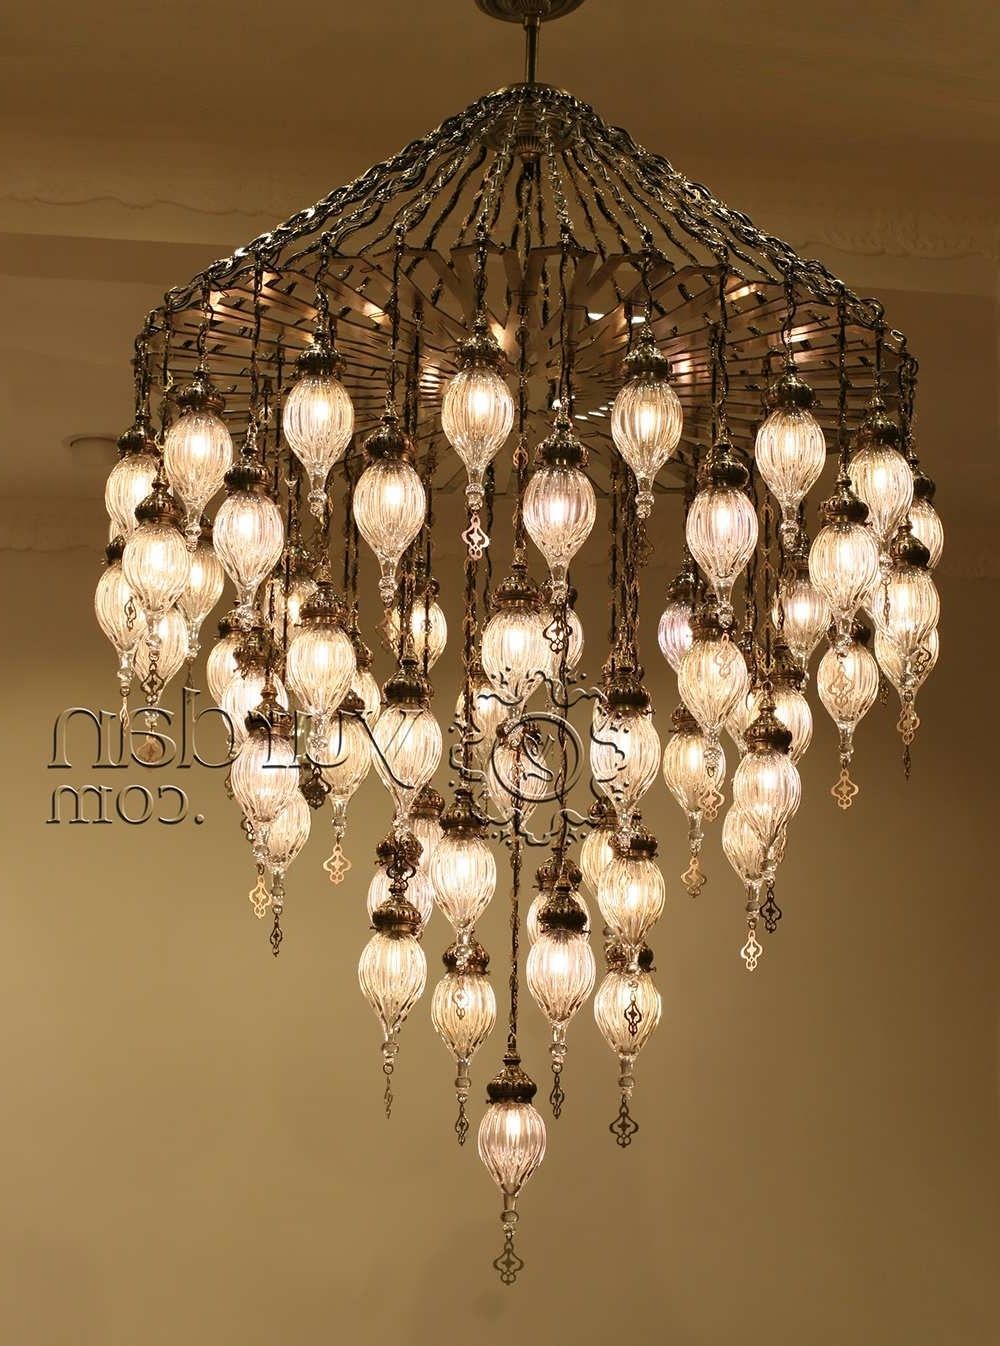 Chandelier : Short Chandelier Sia Chandelier Locker Chandelier For Most Recent Short Chandelier (View 17 of 20)